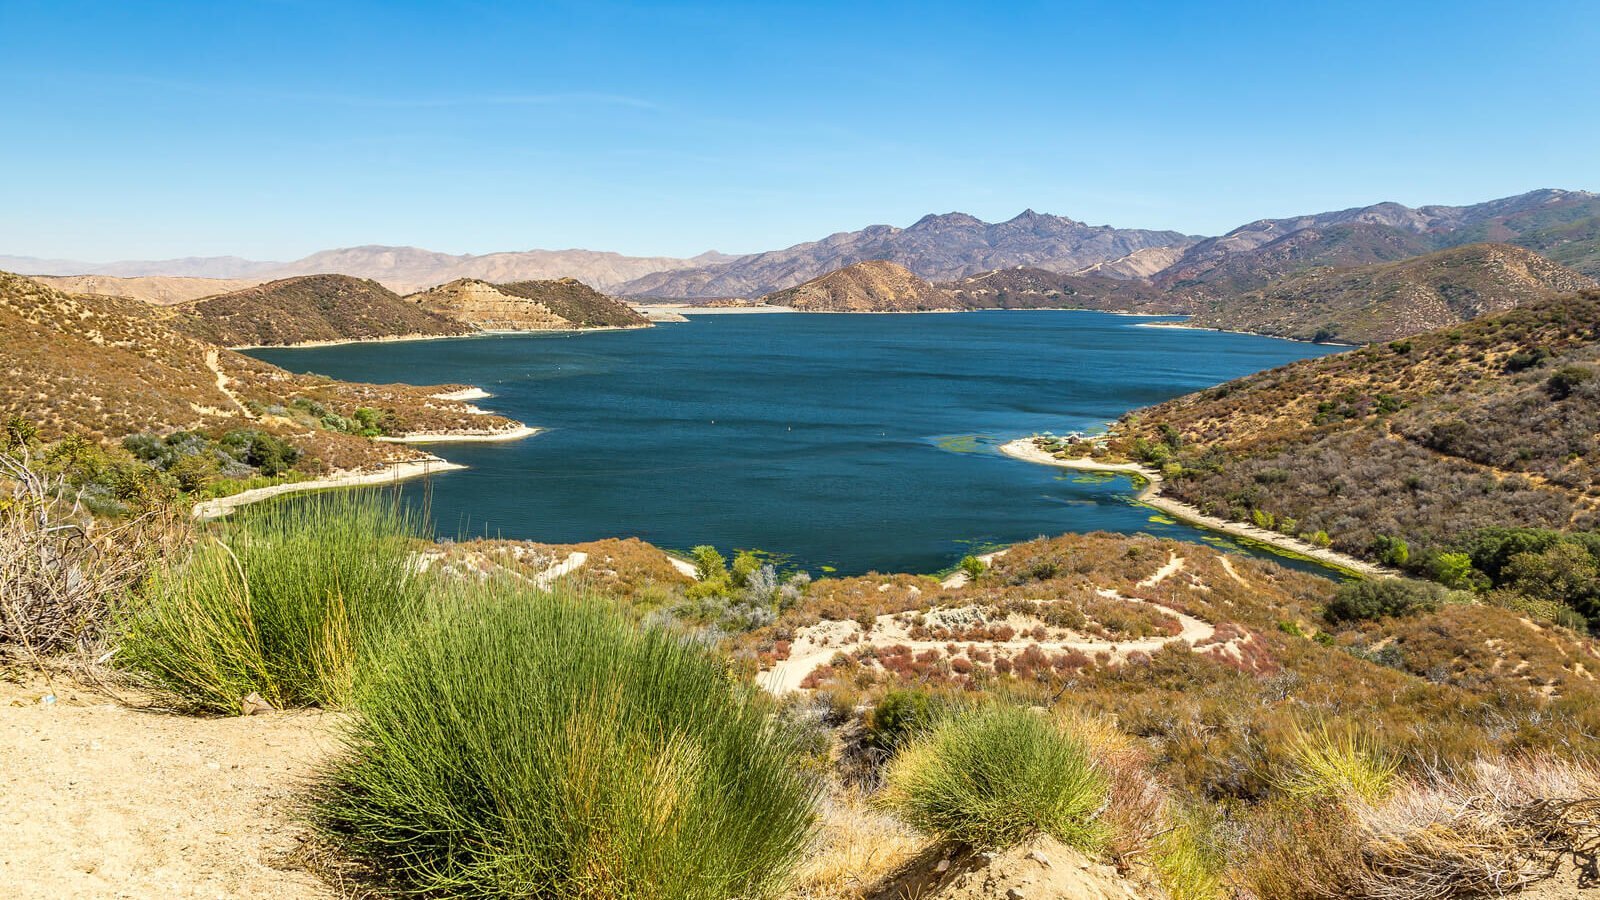 Silverwood Lake, a serene mountain oasis enveloped by lush grass, offers a picturesque retreat.